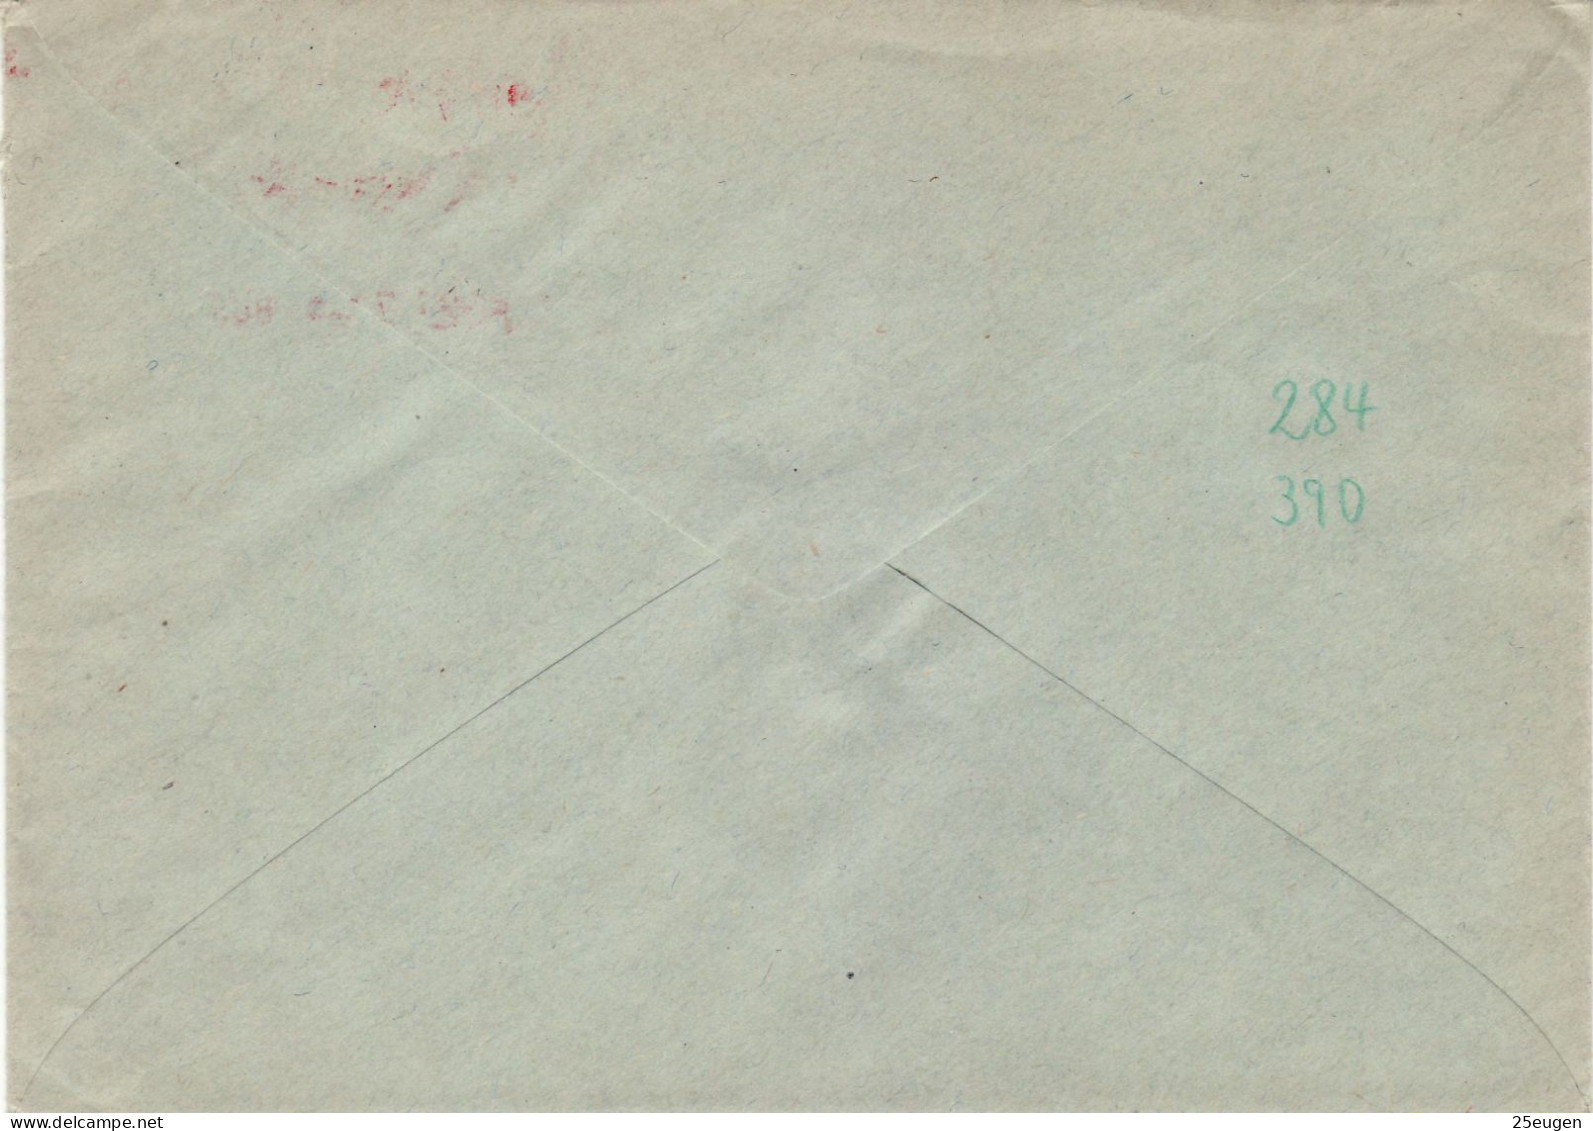 SAAR 1957  R - Letter Sent From BUESCHFELD To OBERBEXBACH - Covers & Documents